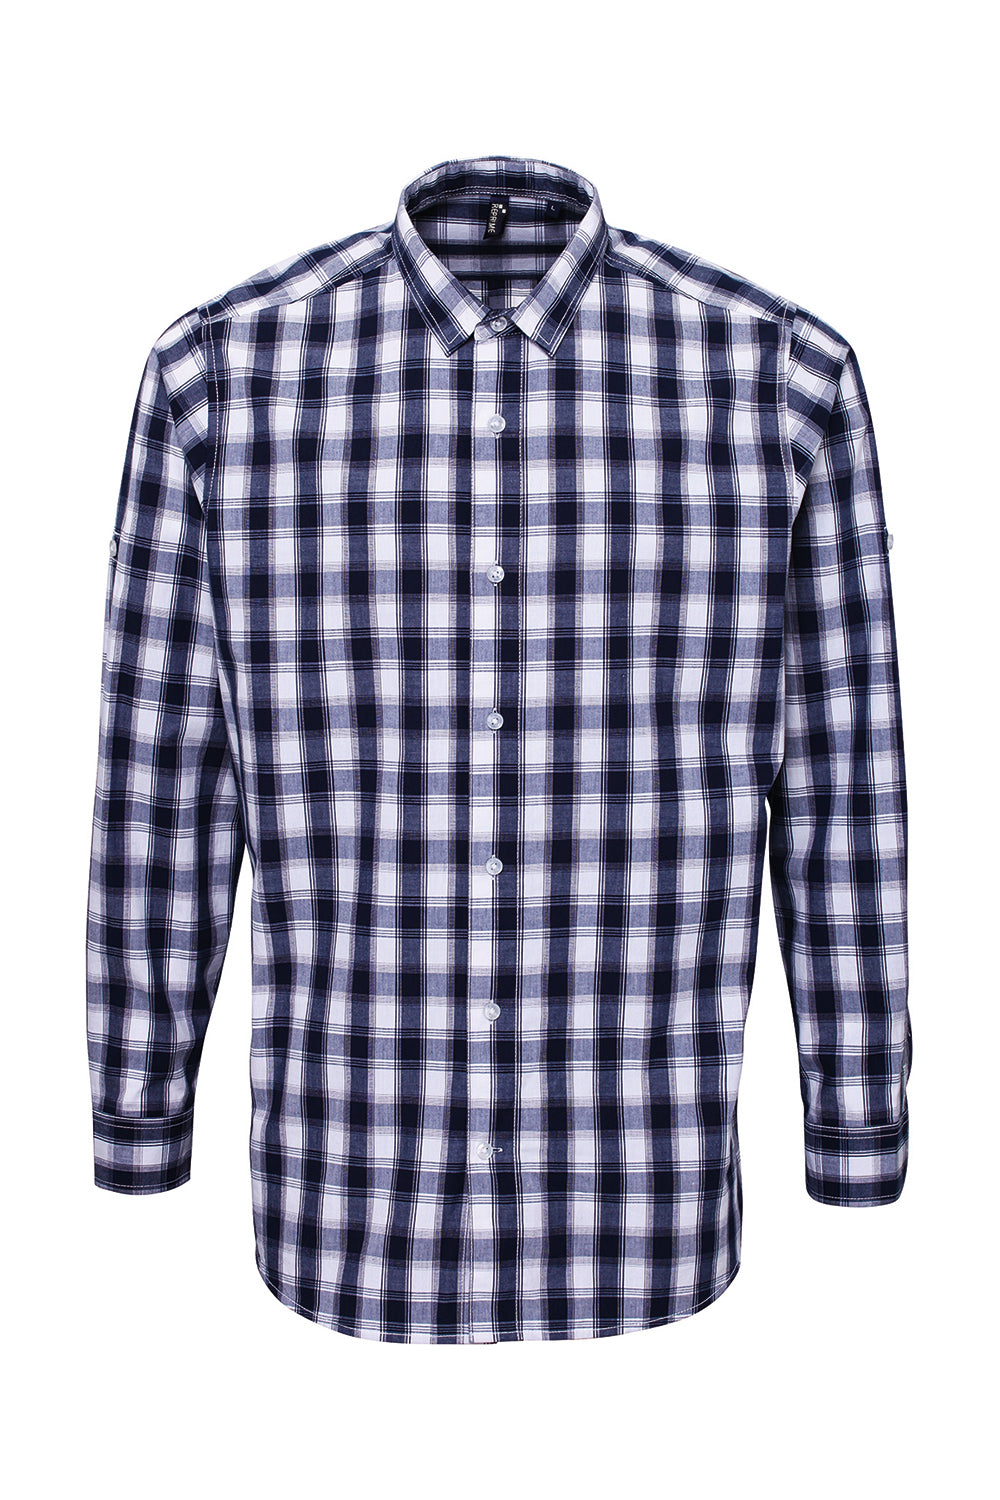 Artisan Collection RP250 Mens Mulligan Check Long Sleeve Button Down Shirt White/Navy Blue Model Flat Back